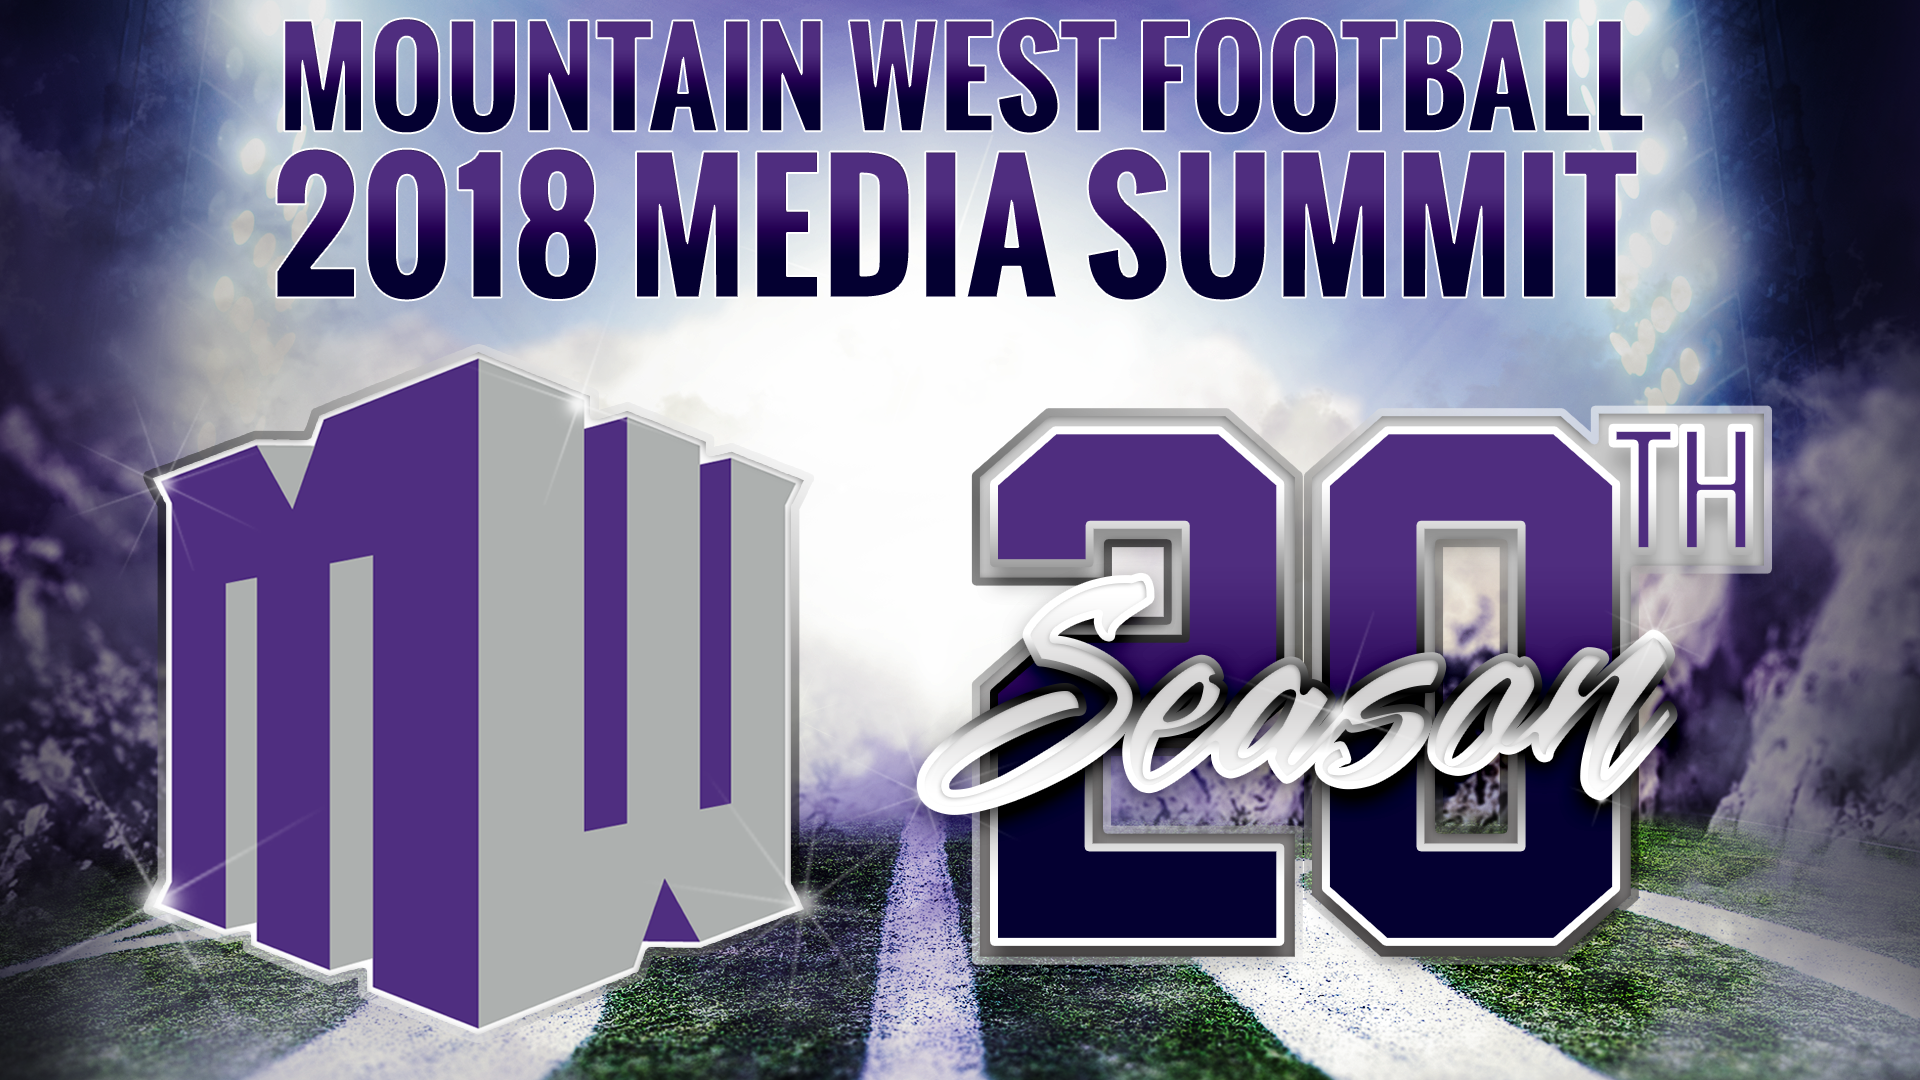 2018 Mountain West Football Preseason All-Conference Team